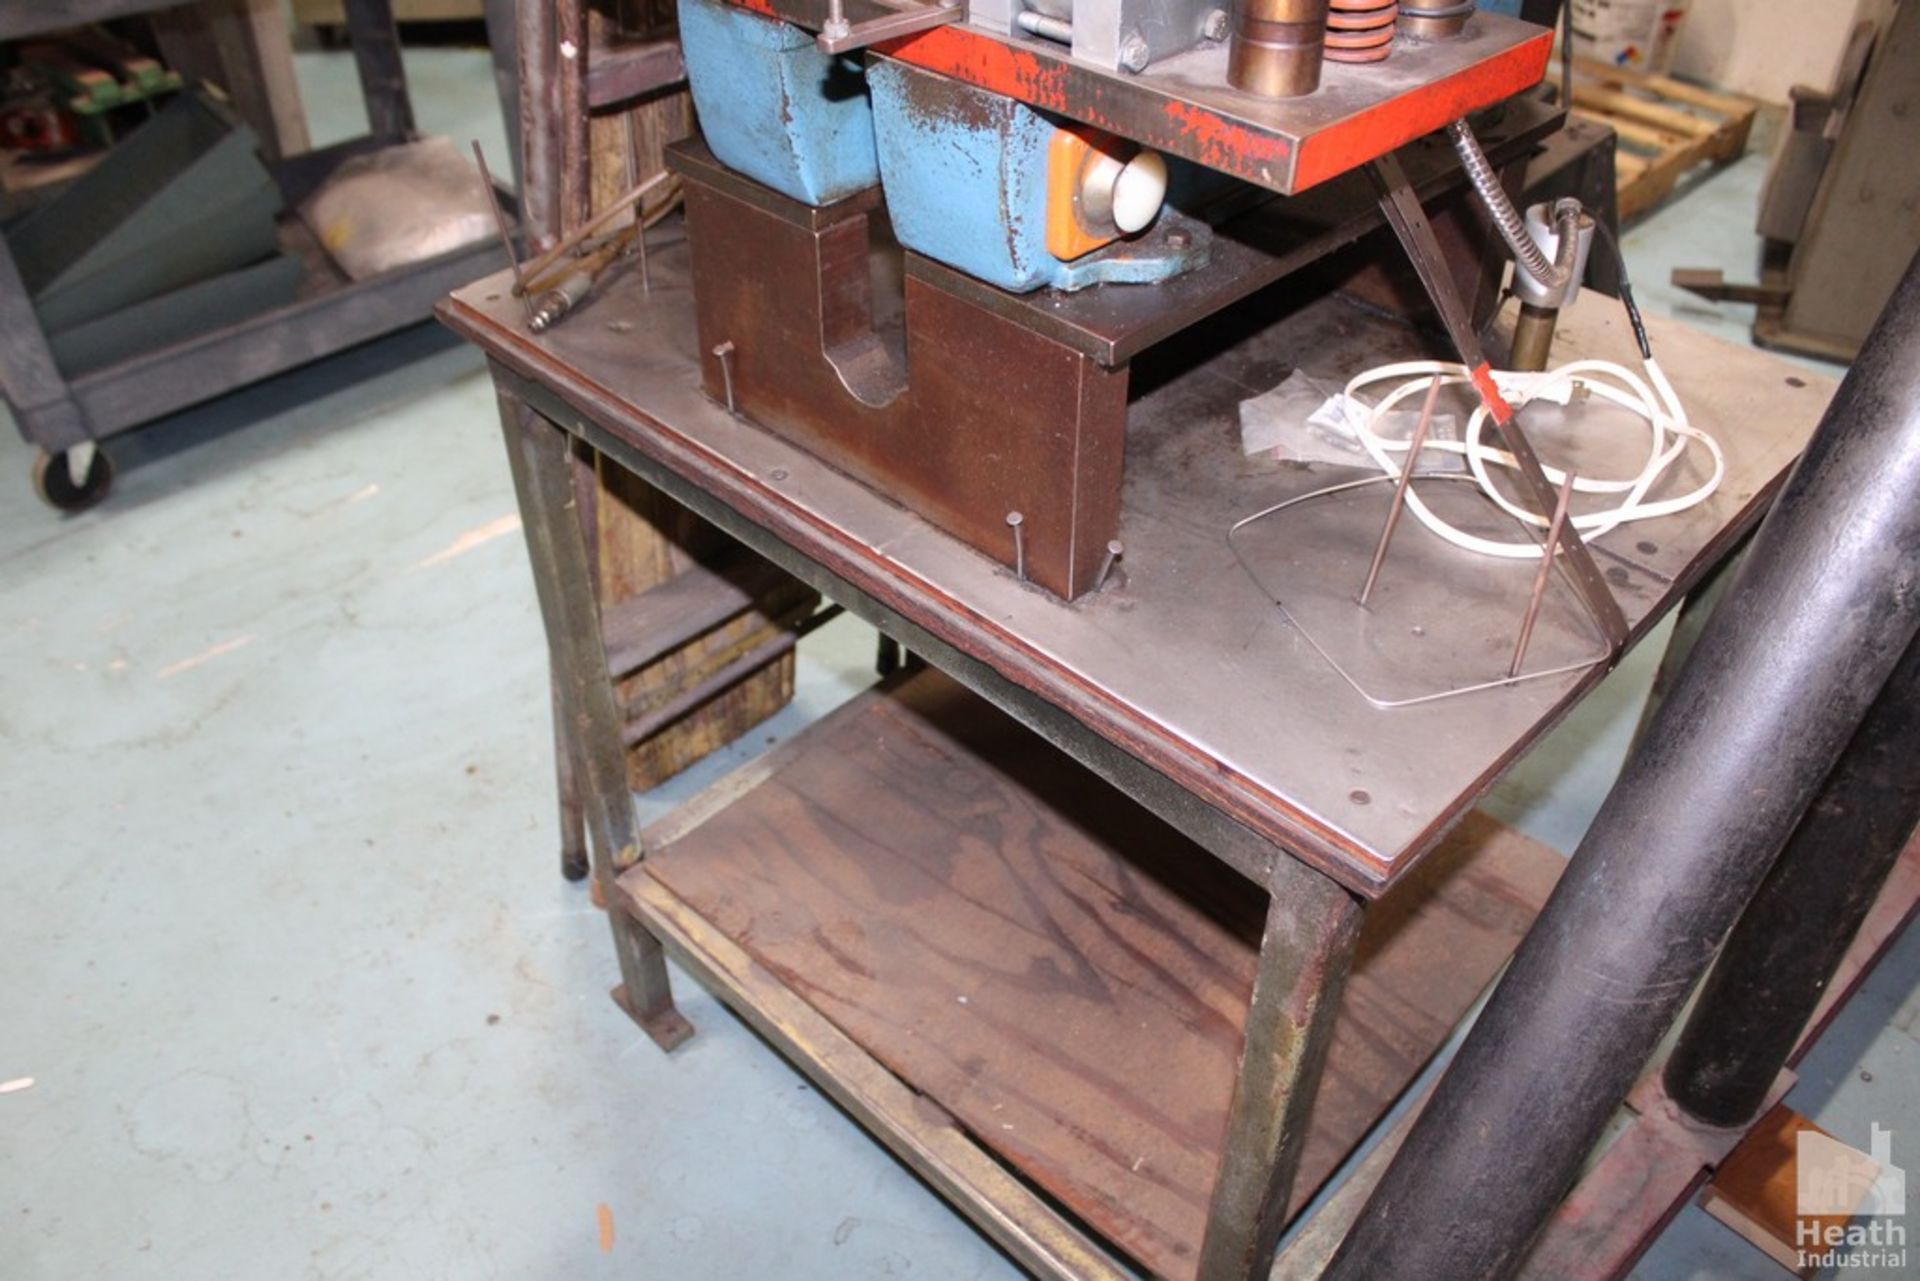 DENISON MULTIPRESS HYDRAULIC PRESS WITH STAND - Image 5 of 5